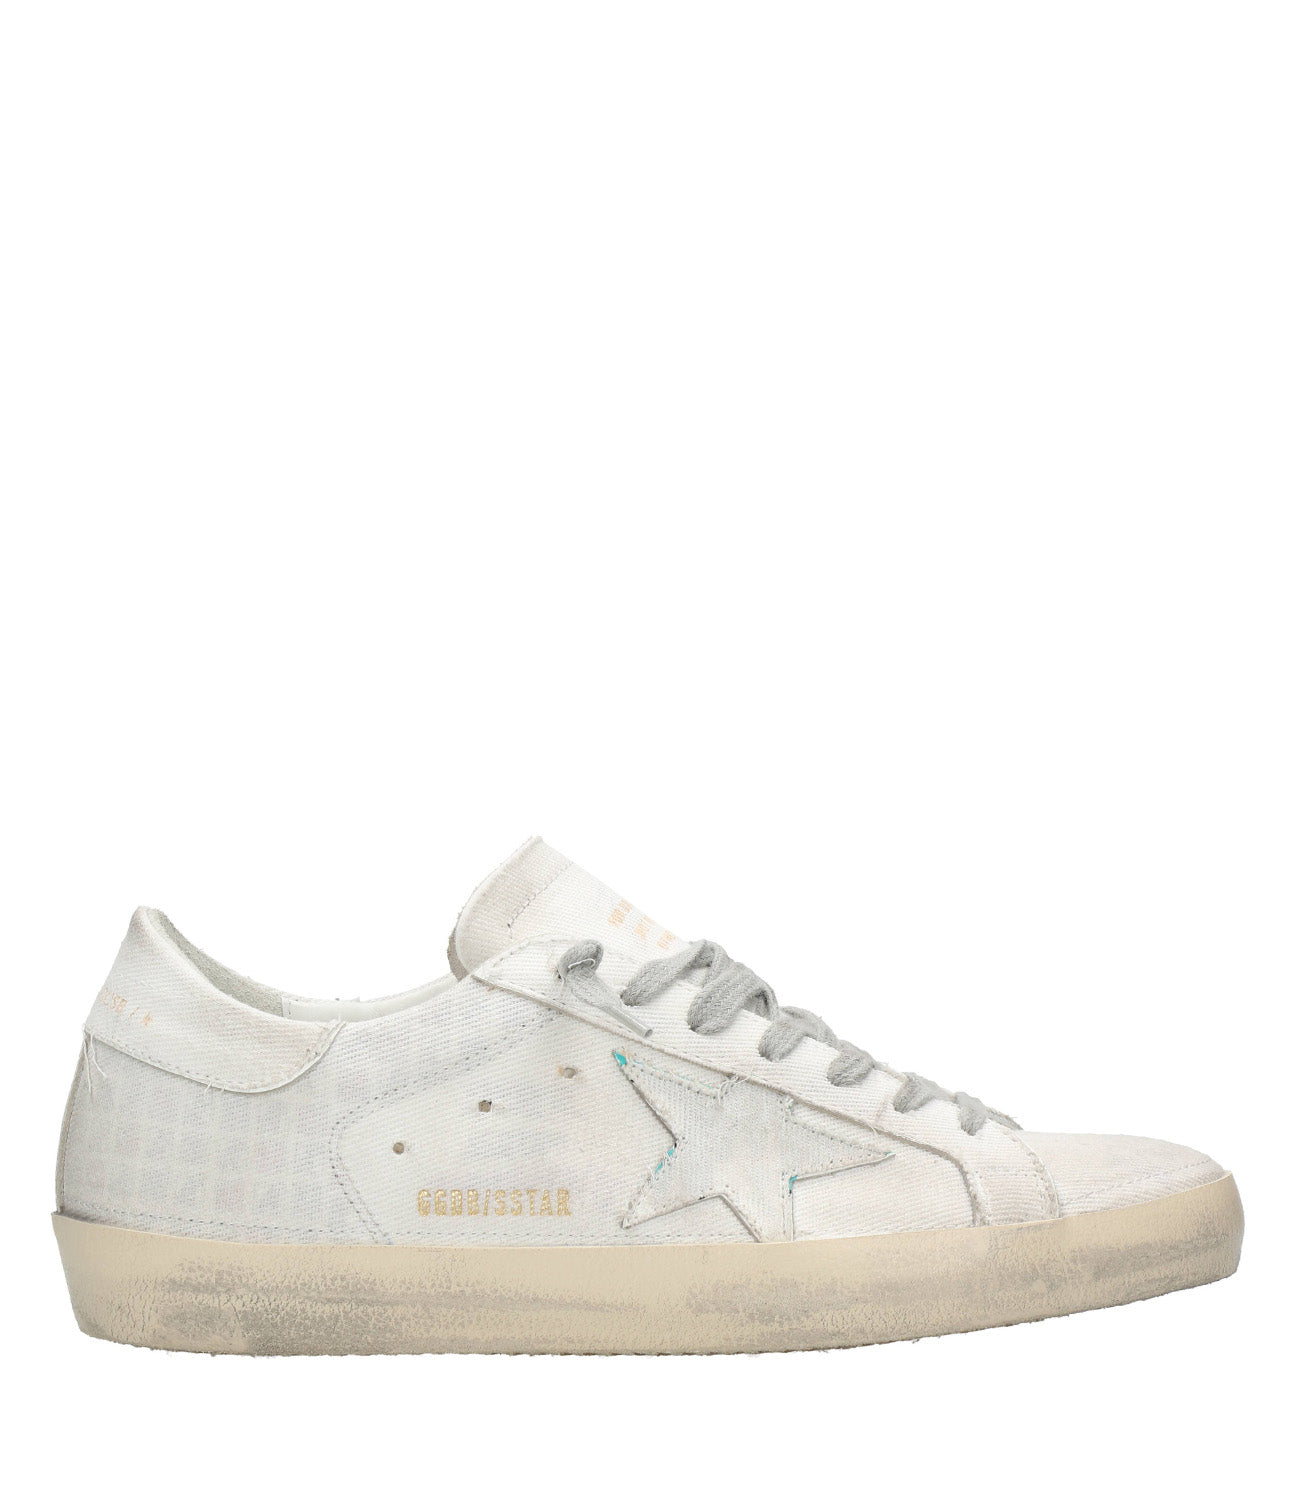 Golden Goose | Superstar Sneakers White and Multicolor